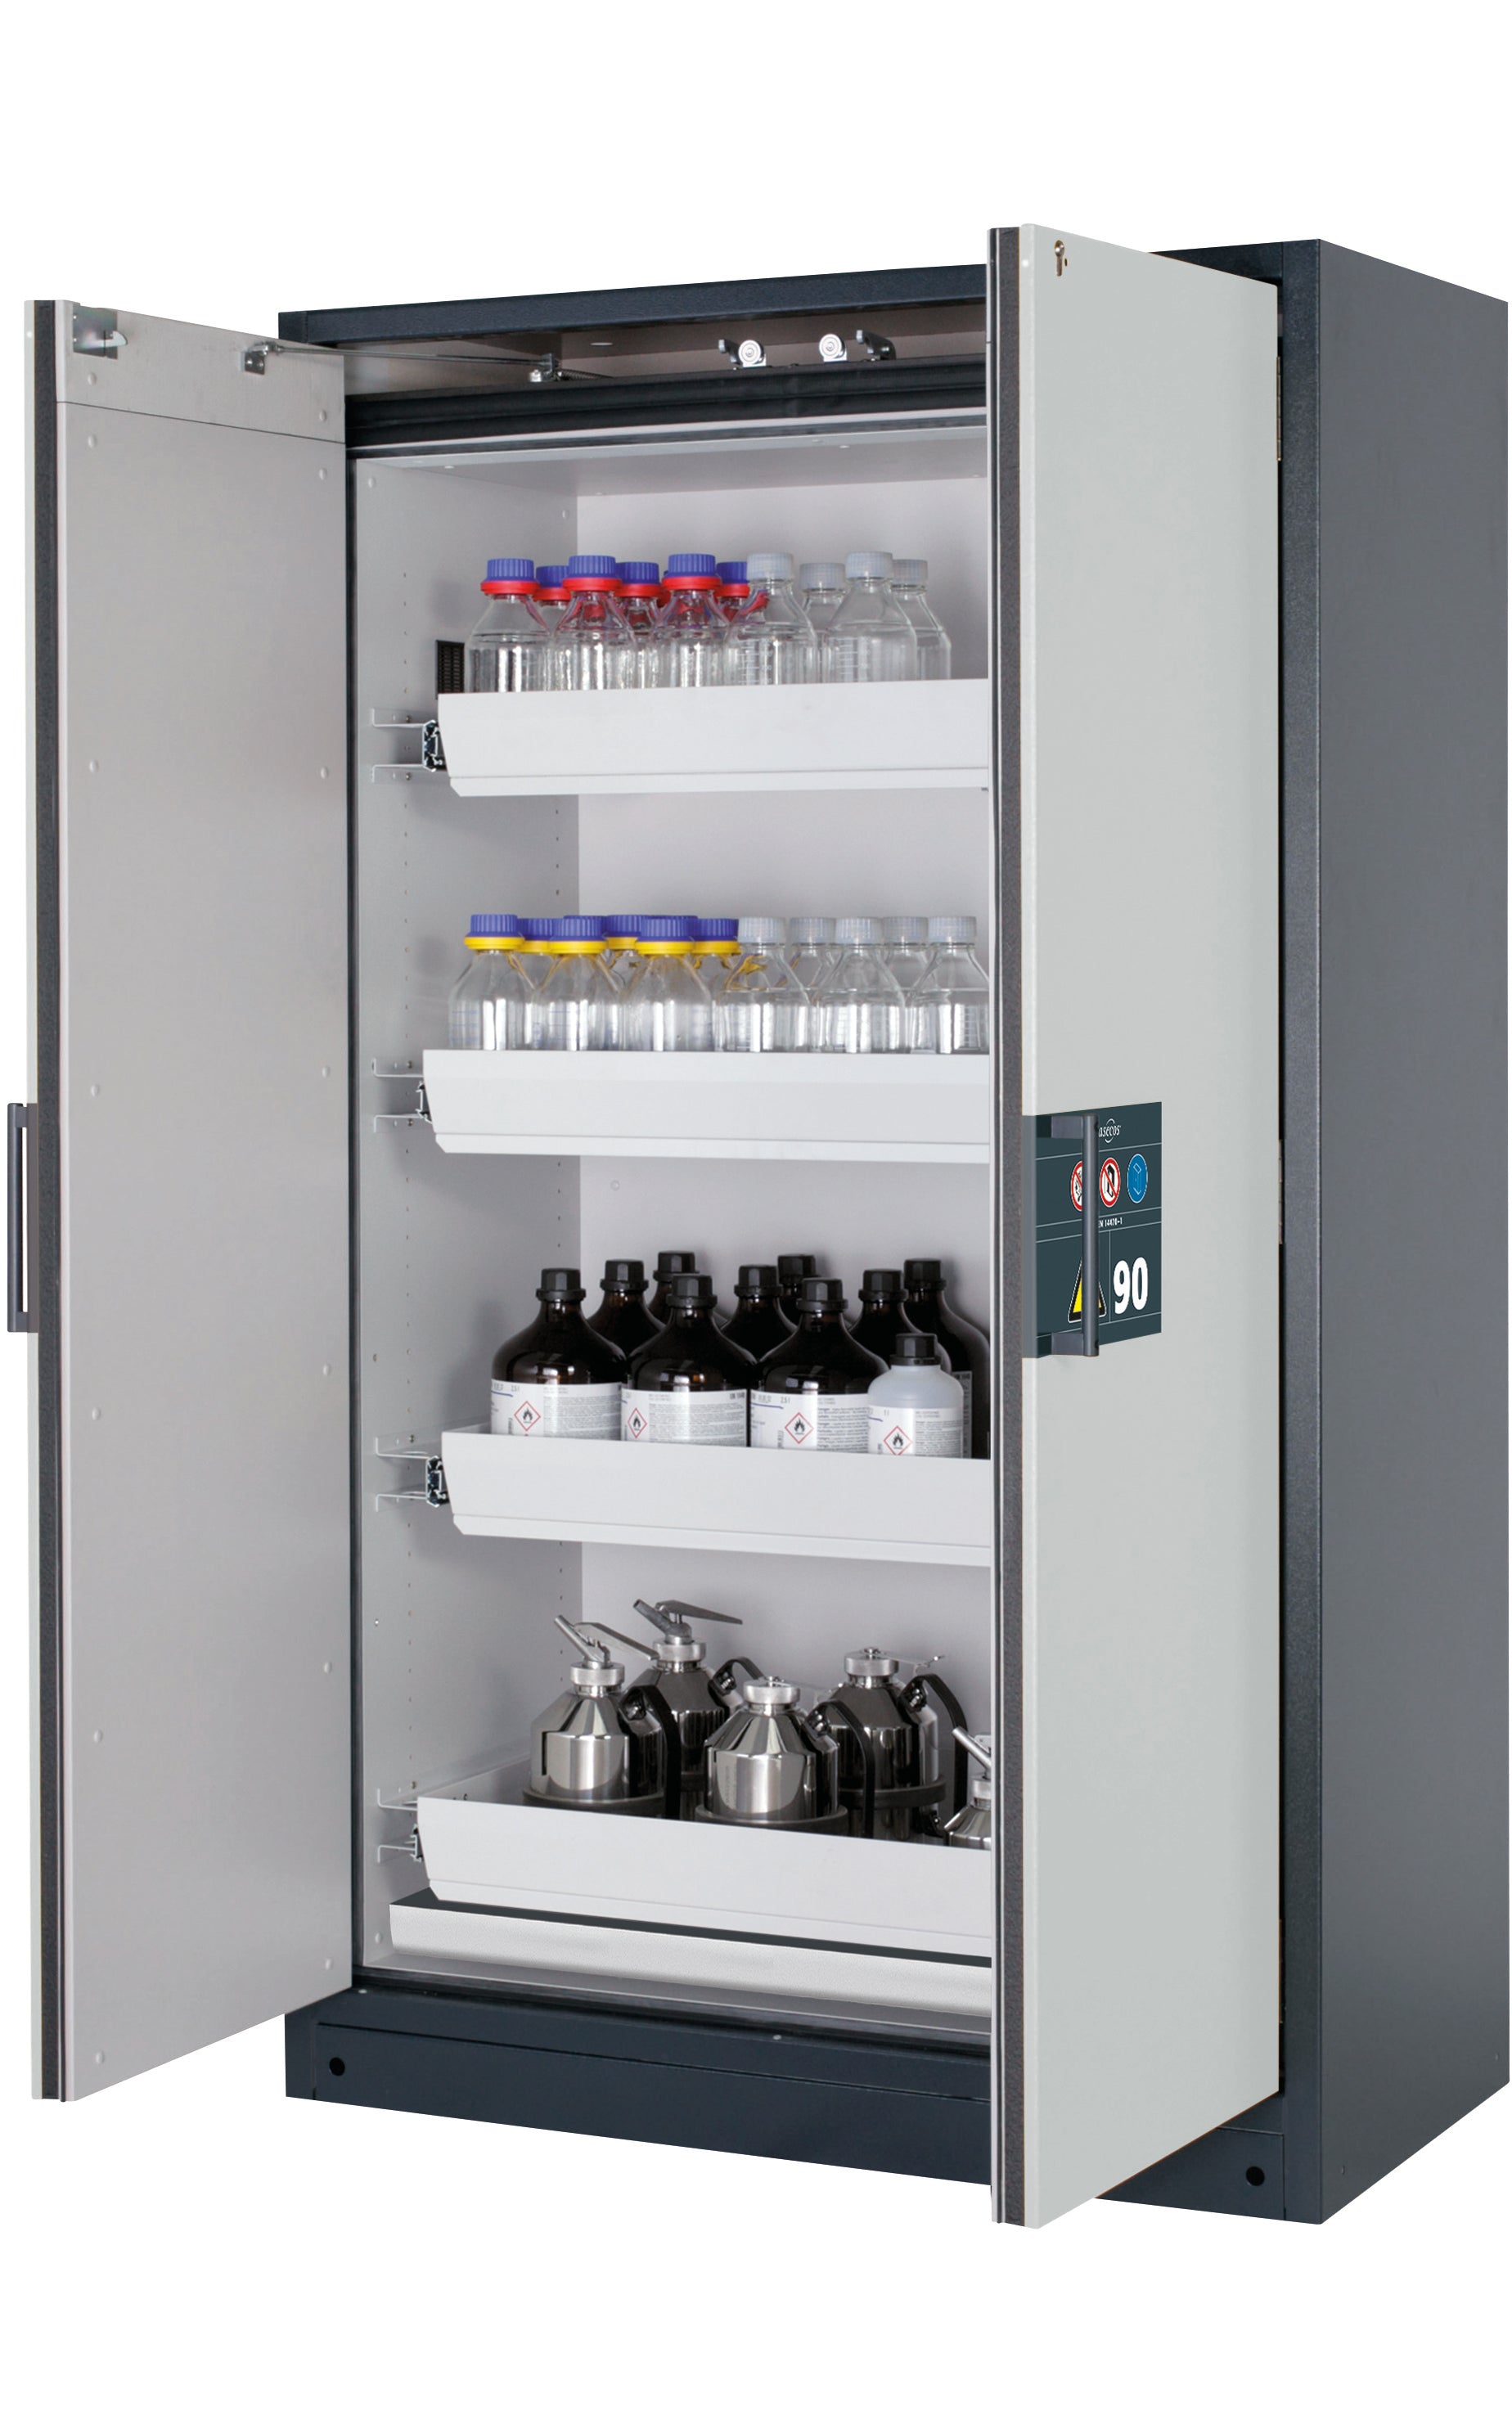 Type 90 safety storage cabinet Q-CLASSIC-90 model Q90.195.120 in light grey RAL 7035 with 4x drawer (standard) (sheet steel),